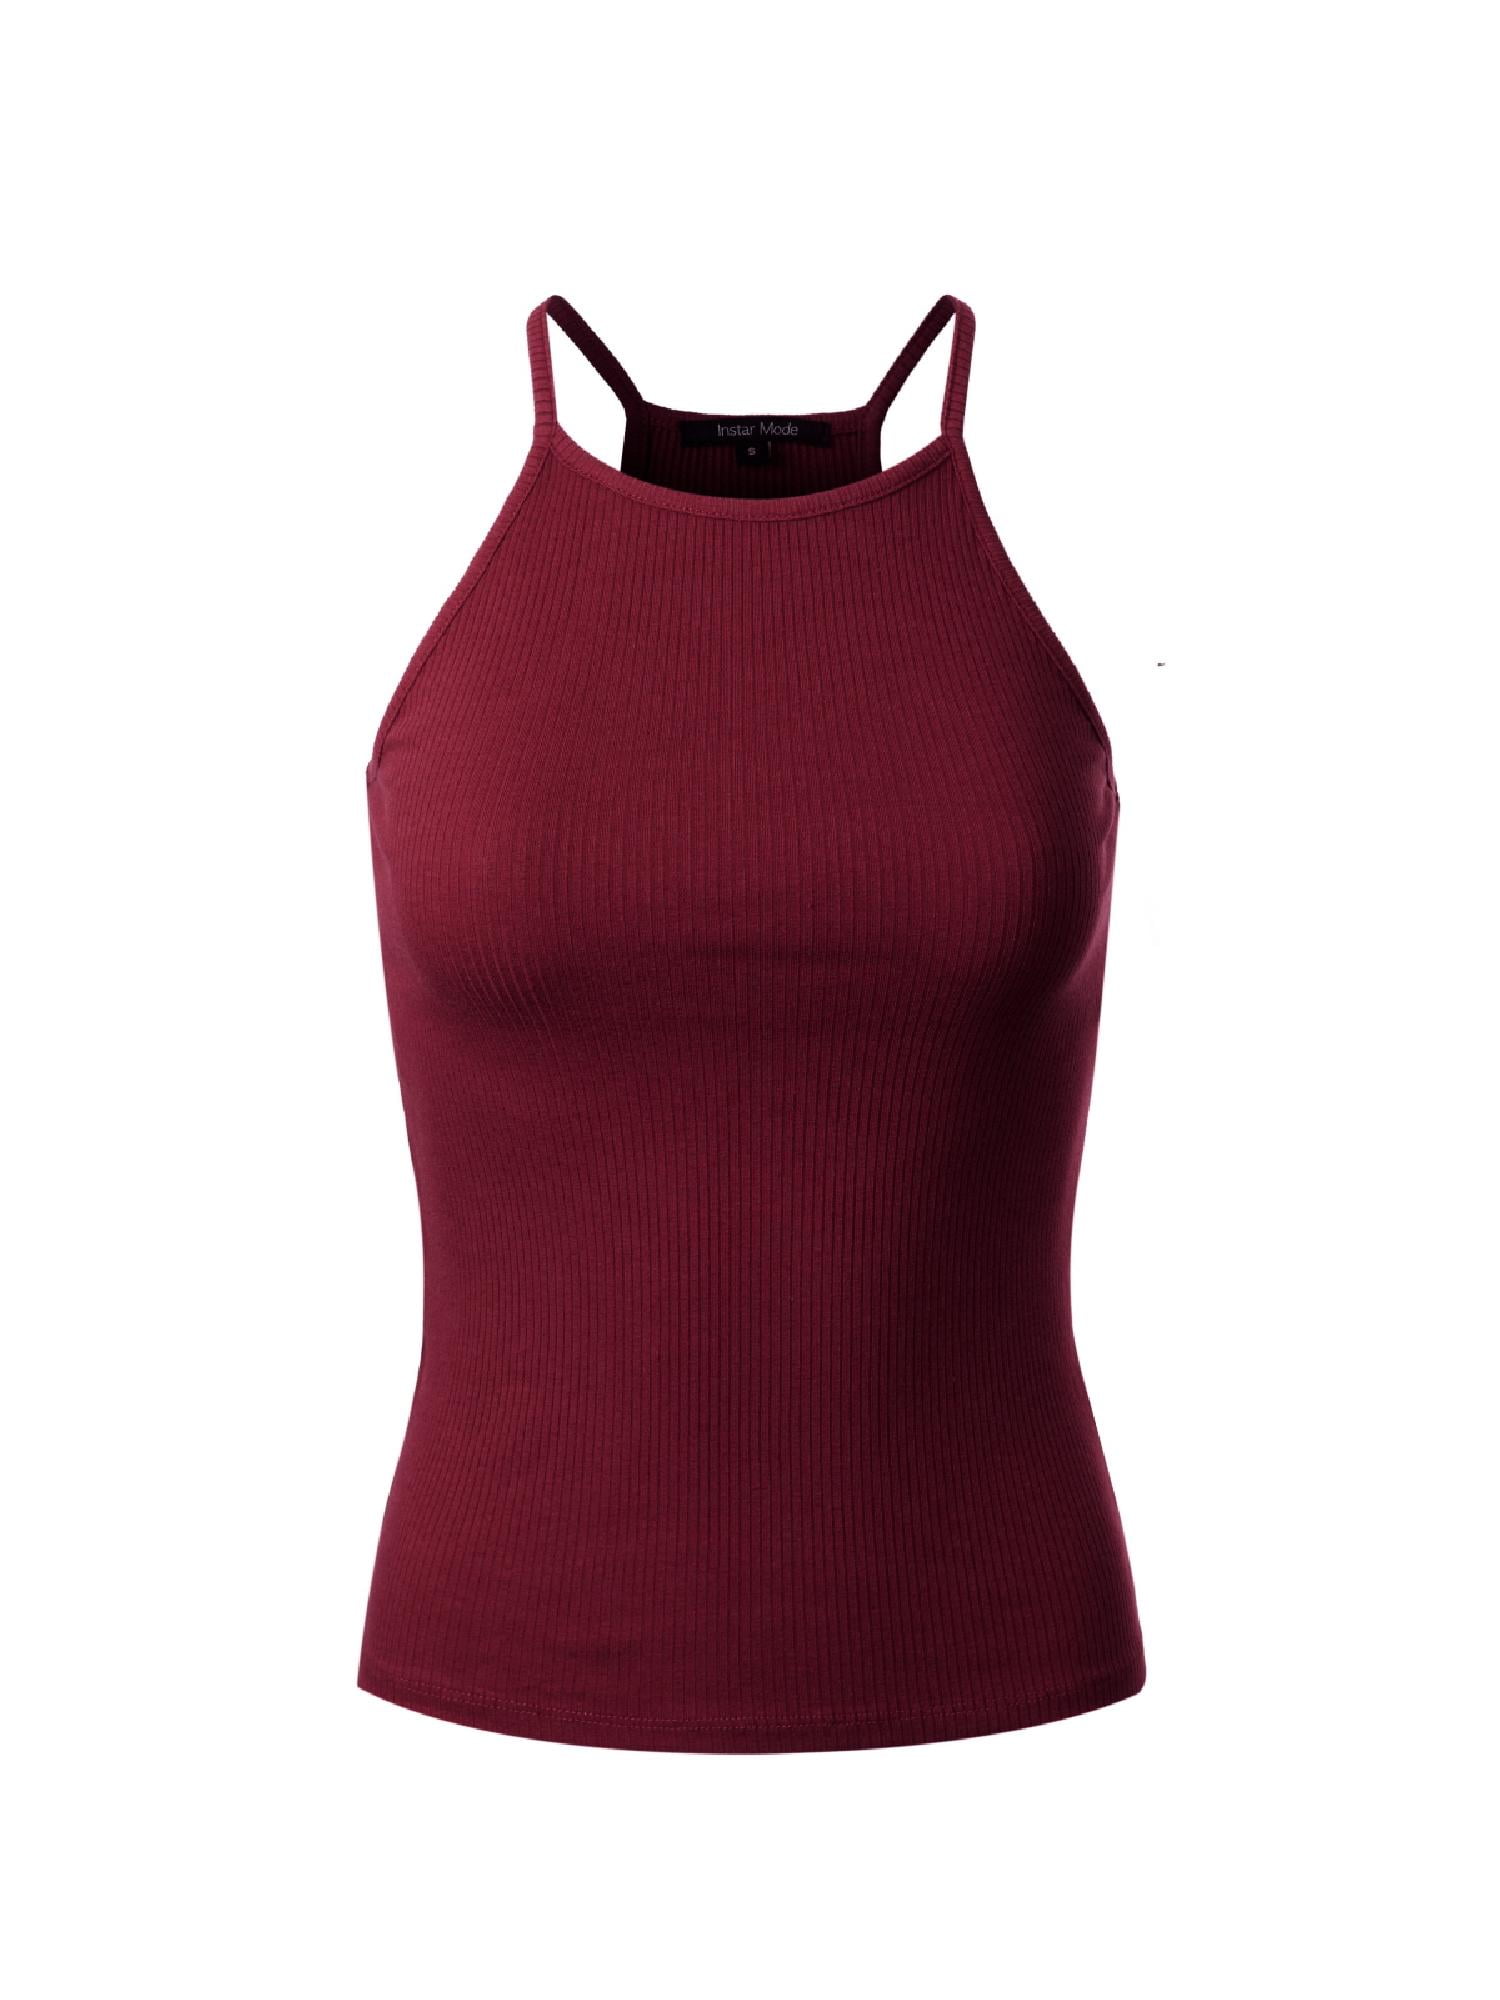 Made by Olivia - Made by Olivia Women's Basic High Neck Ribbed Tank Top ...